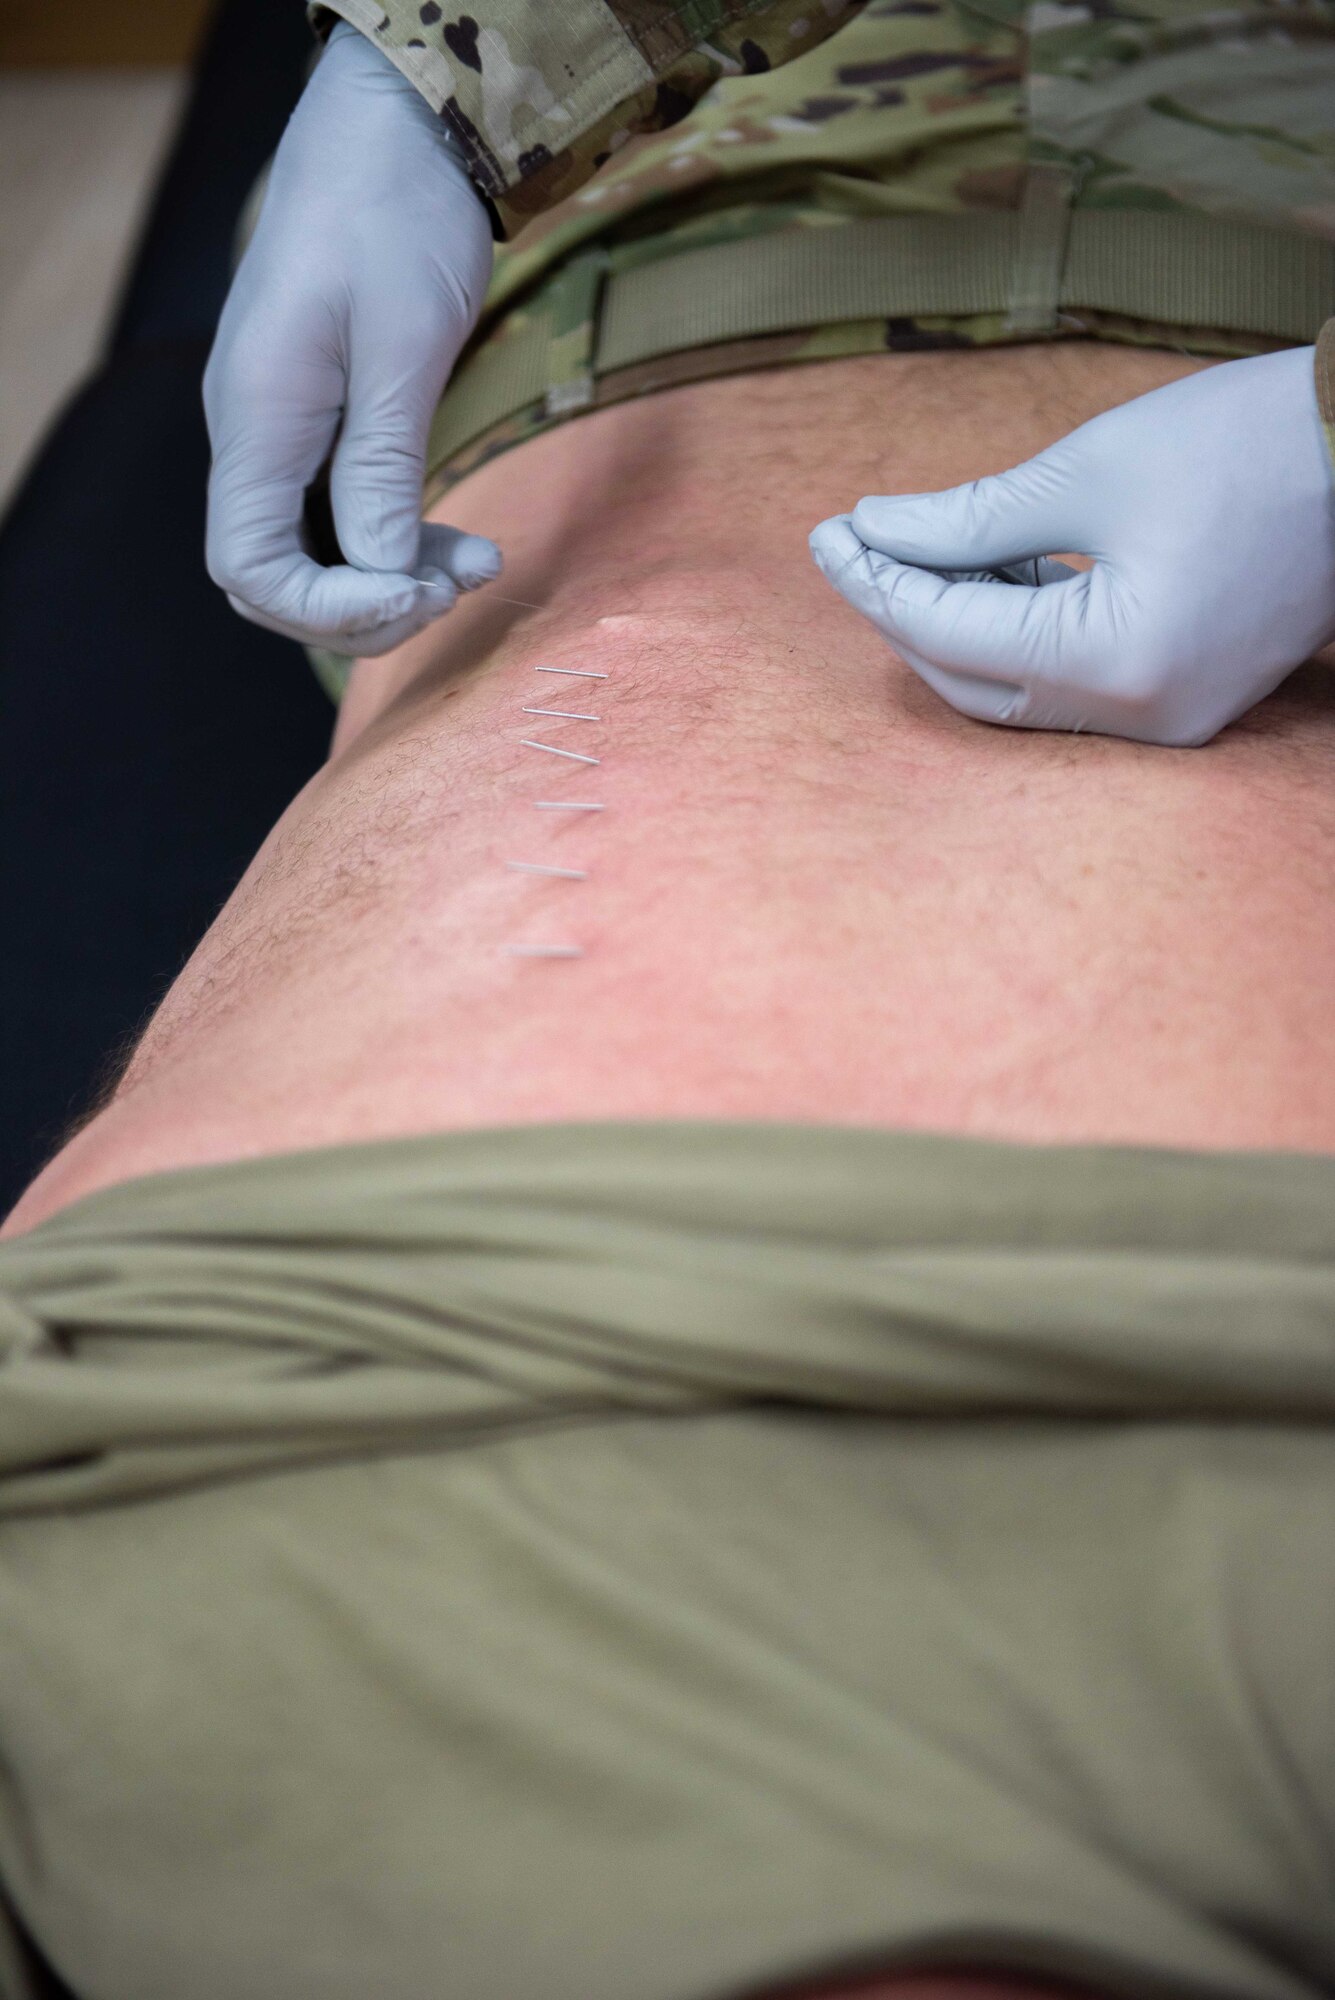 Maj. Adam Frost, 380th Expeditionary Medical Group physical therapist, removes a needle from a patients back May 17, 2019 at Al Dhafra Air Base, United Arab Emirates. Fry involves dry needling, a form of acupuncture, and cupping into his treatments – he has found both to be extremely effective at targeting trigger points, releasing muscle spasms and alleviating pain. U.S. Air Force photo by Staff Sgt. Chris Thornbury)